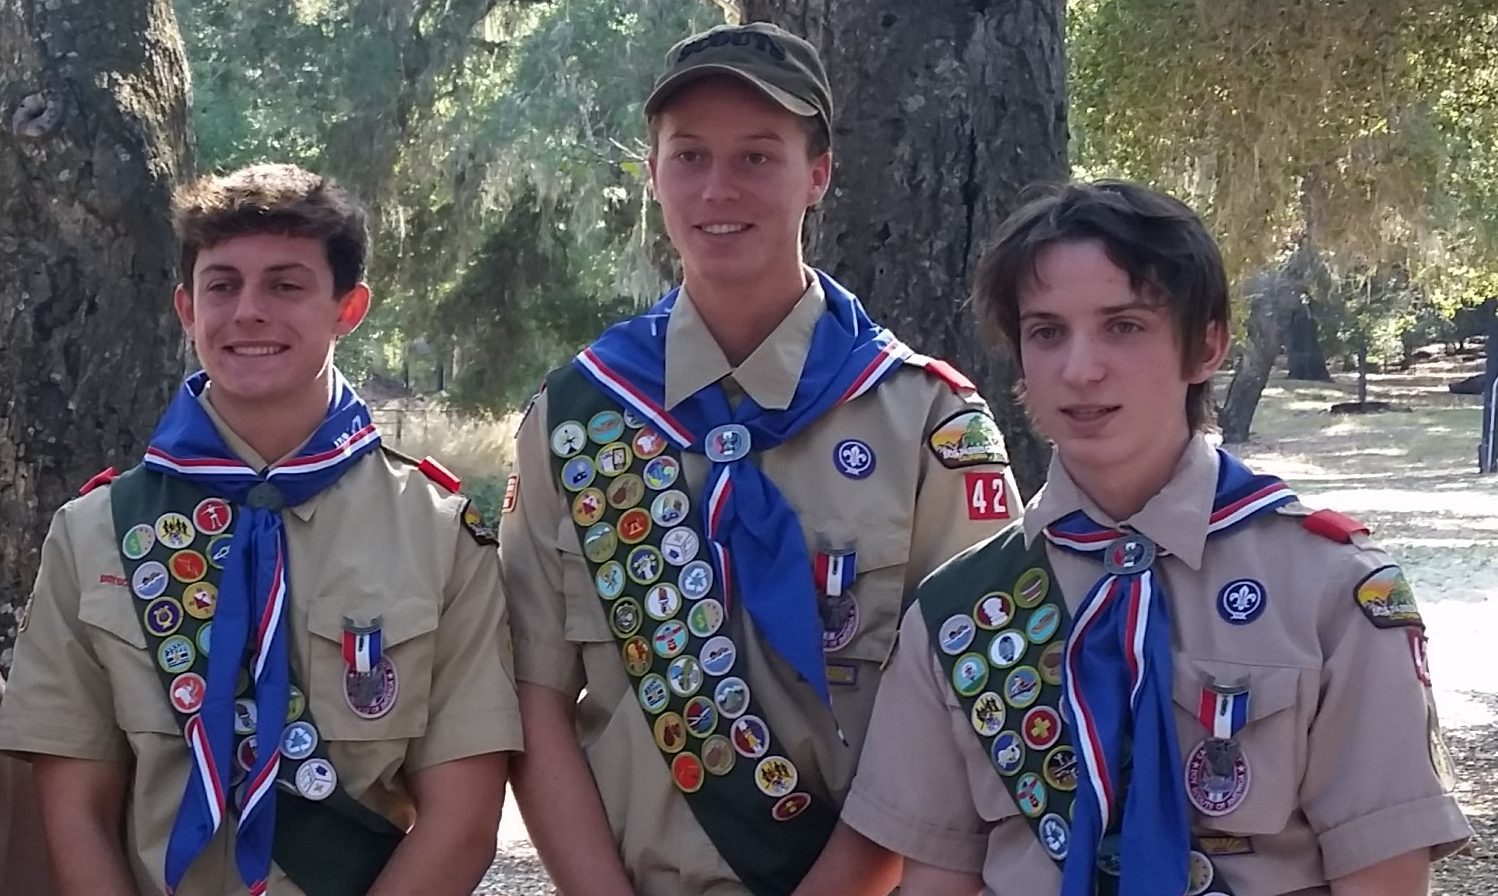 Local Boy Scouts earn Eagle badges